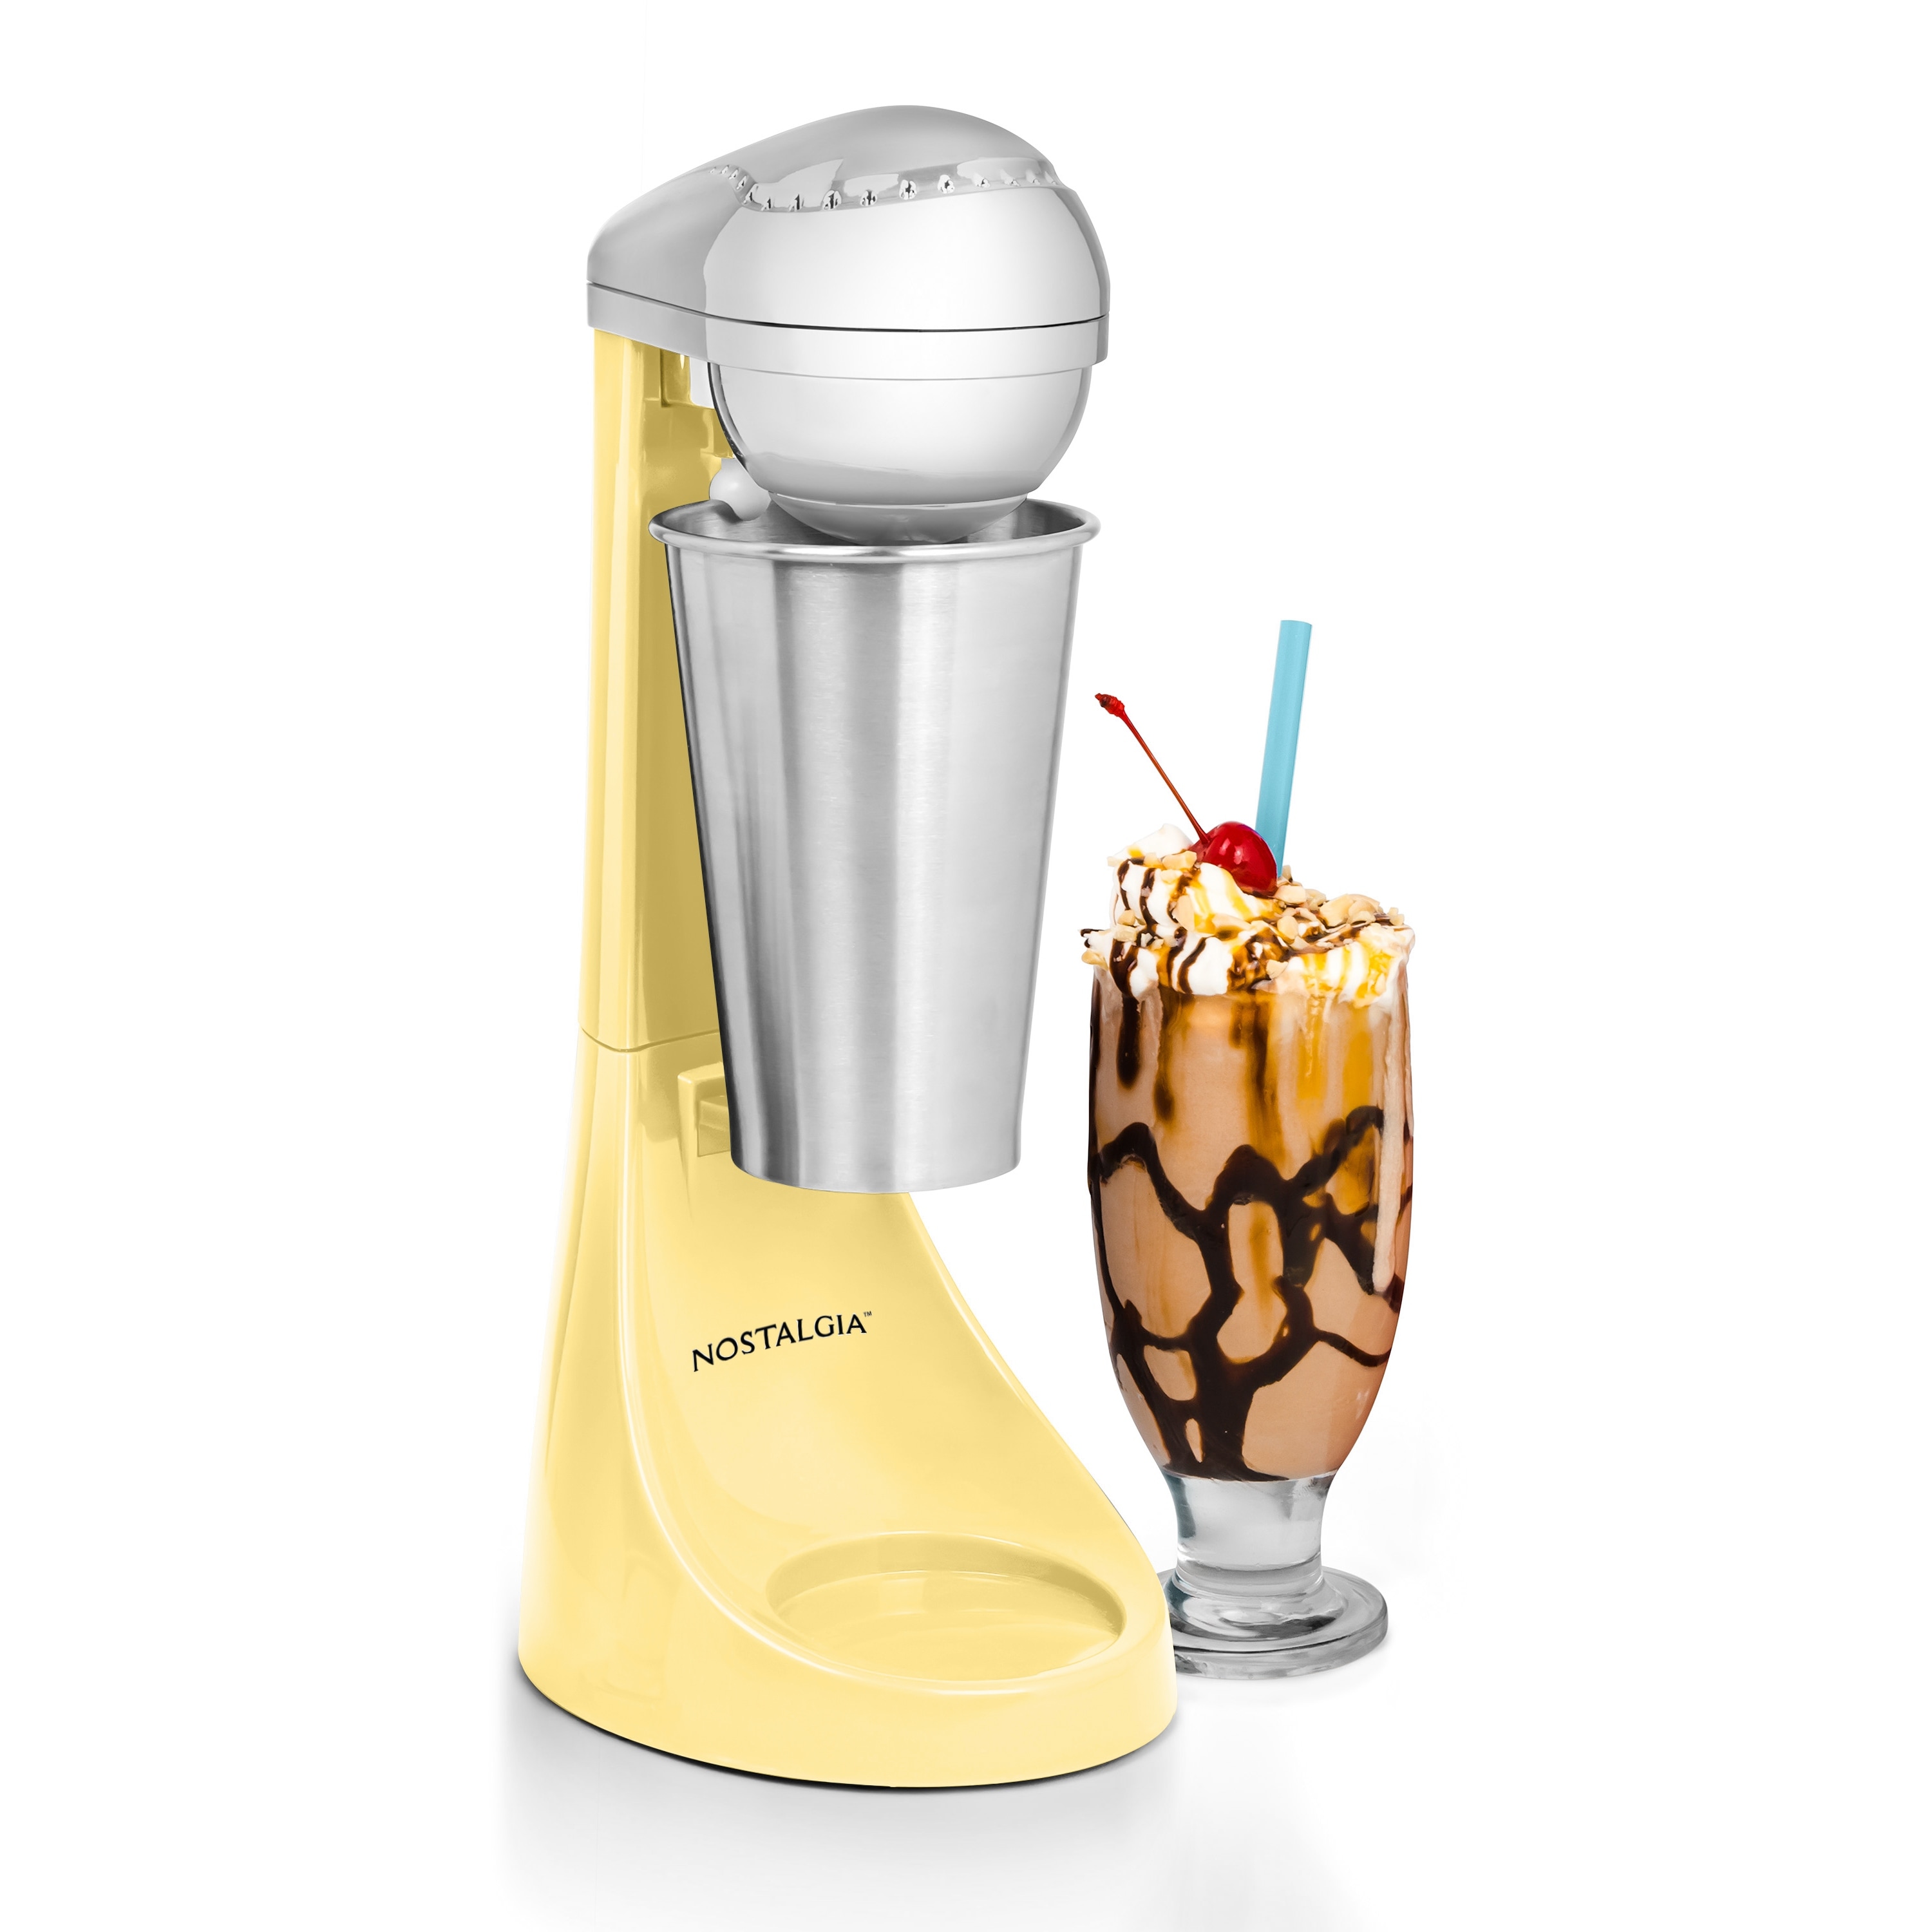 https://ak1.ostkcdn.com/images/products/is/images/direct/2bc317aaa0532a1081a35a9e09ed166db54ccfc2/Nostalgia-Two-Speed-Electric-Milkshake-Maker-and-Drink-Mixer.jpg